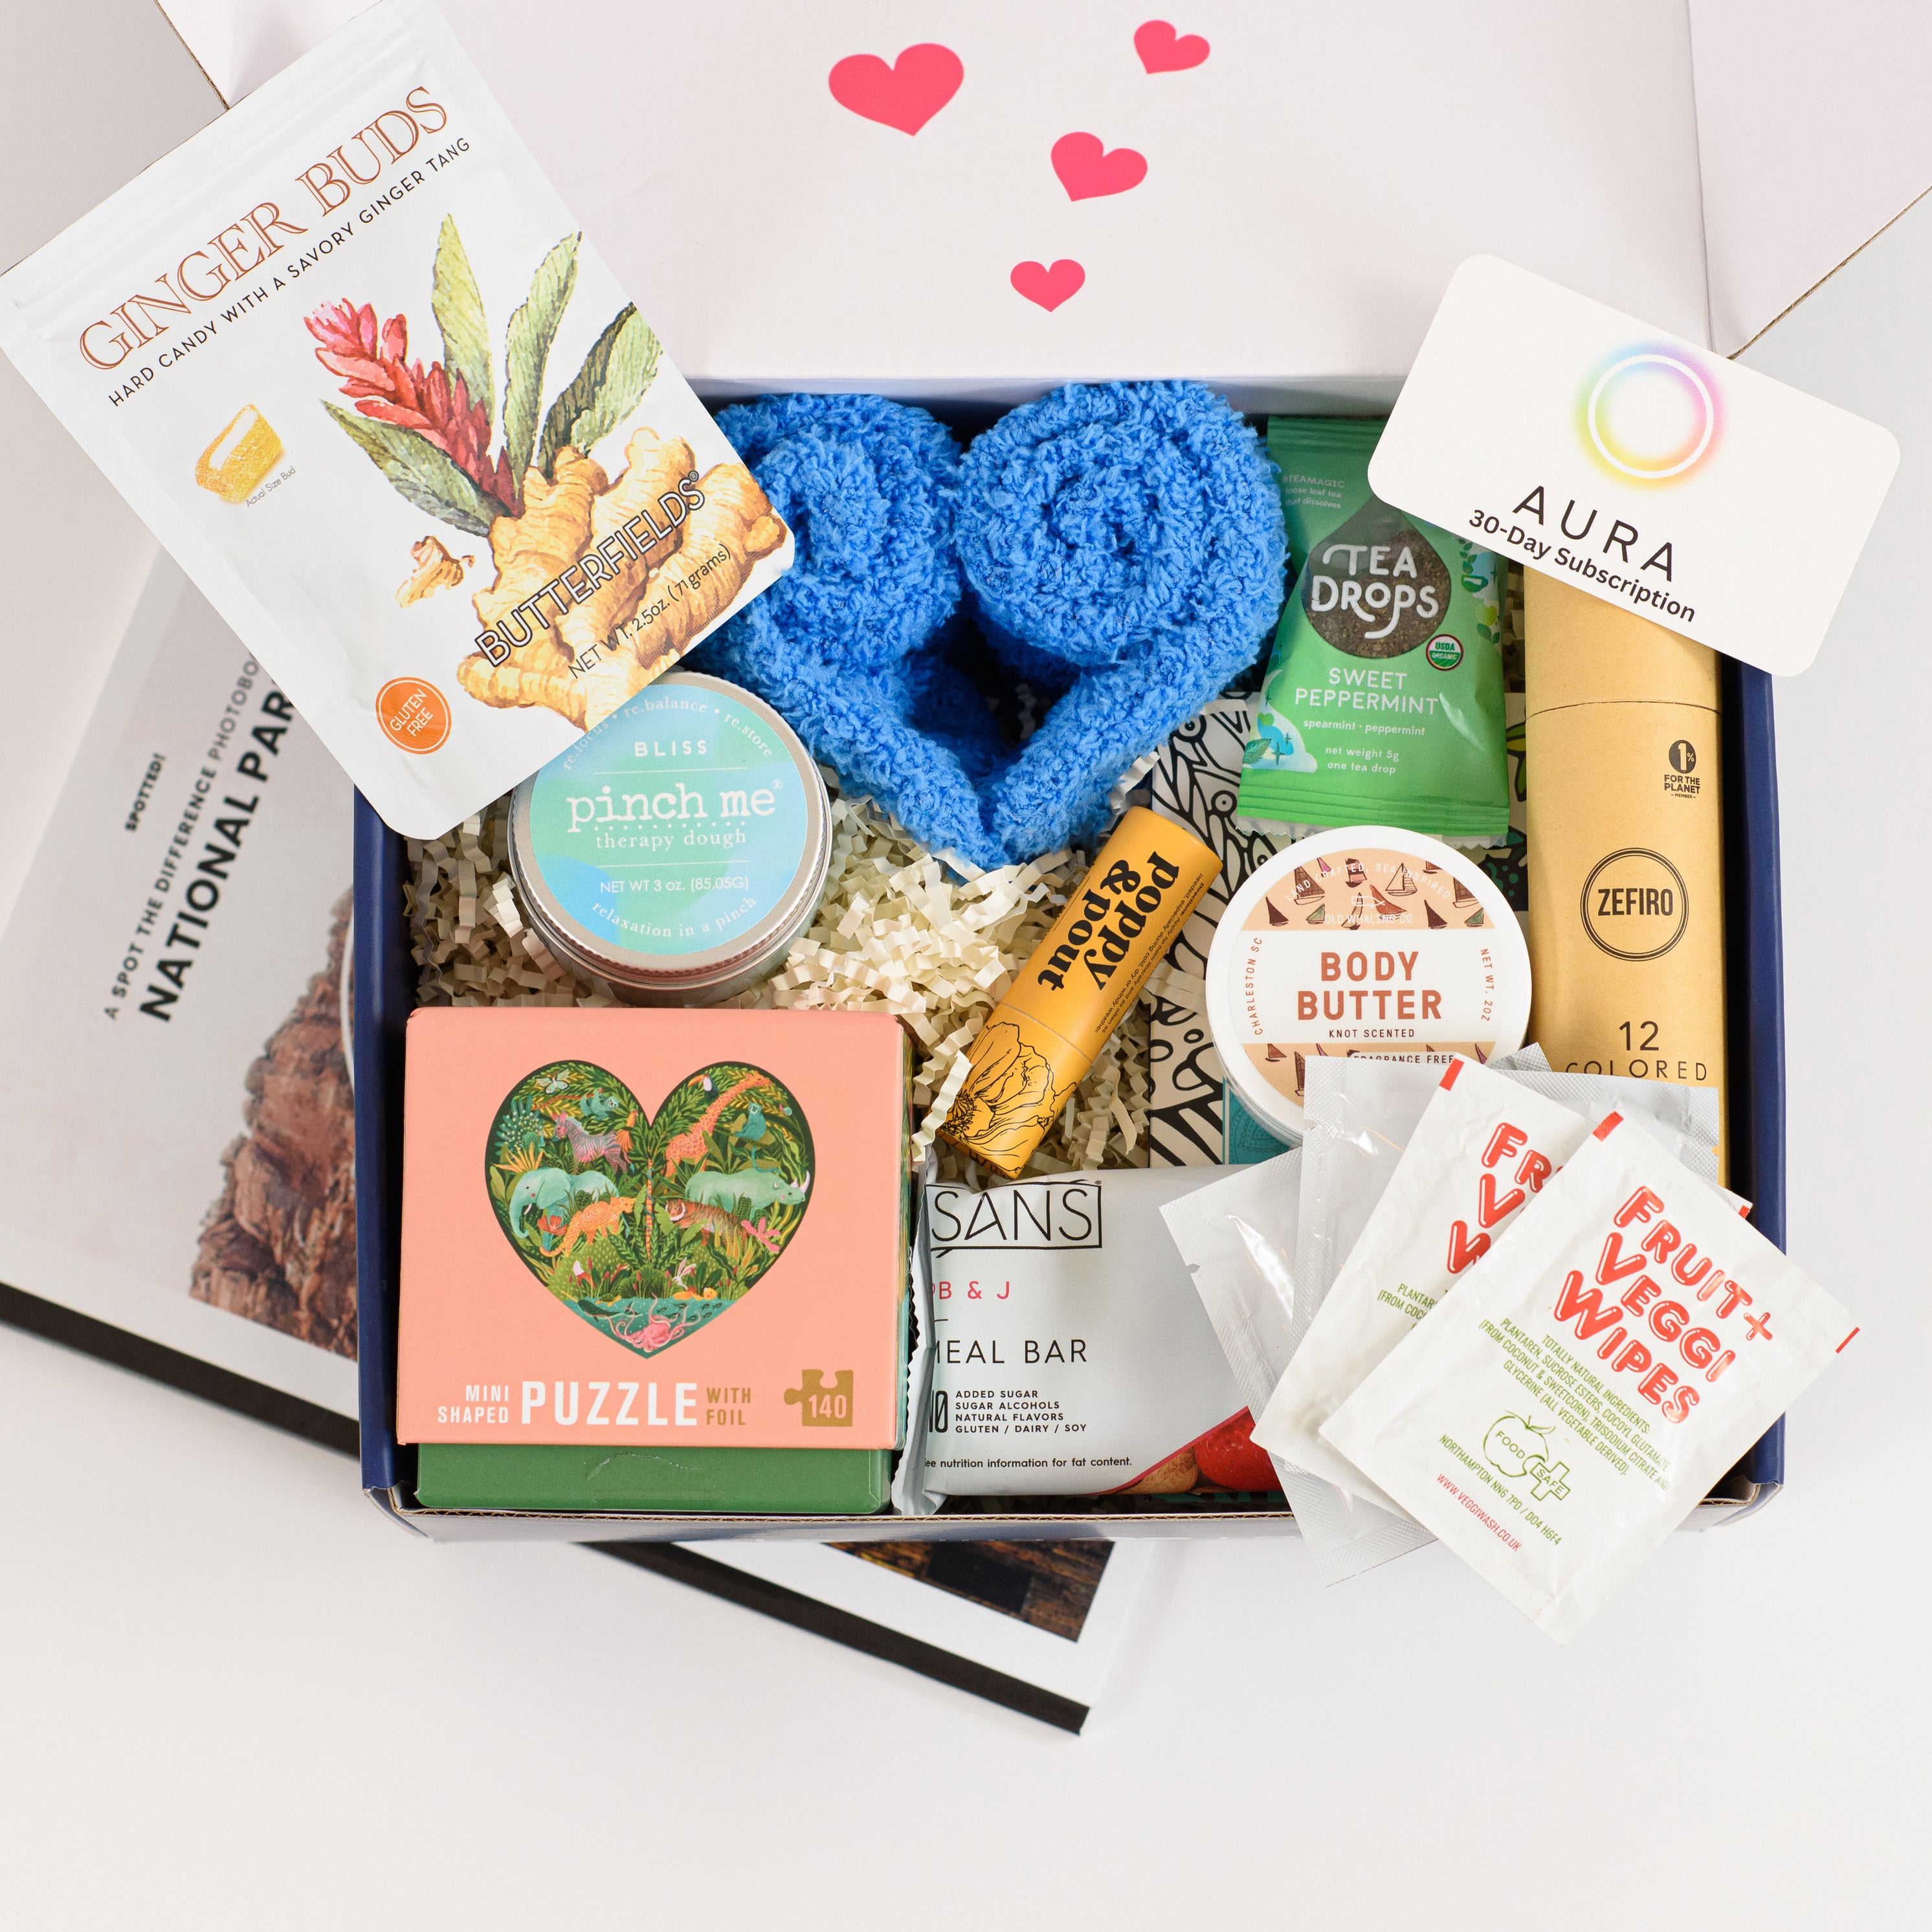 All You Need Is Love Box – Leaping Love